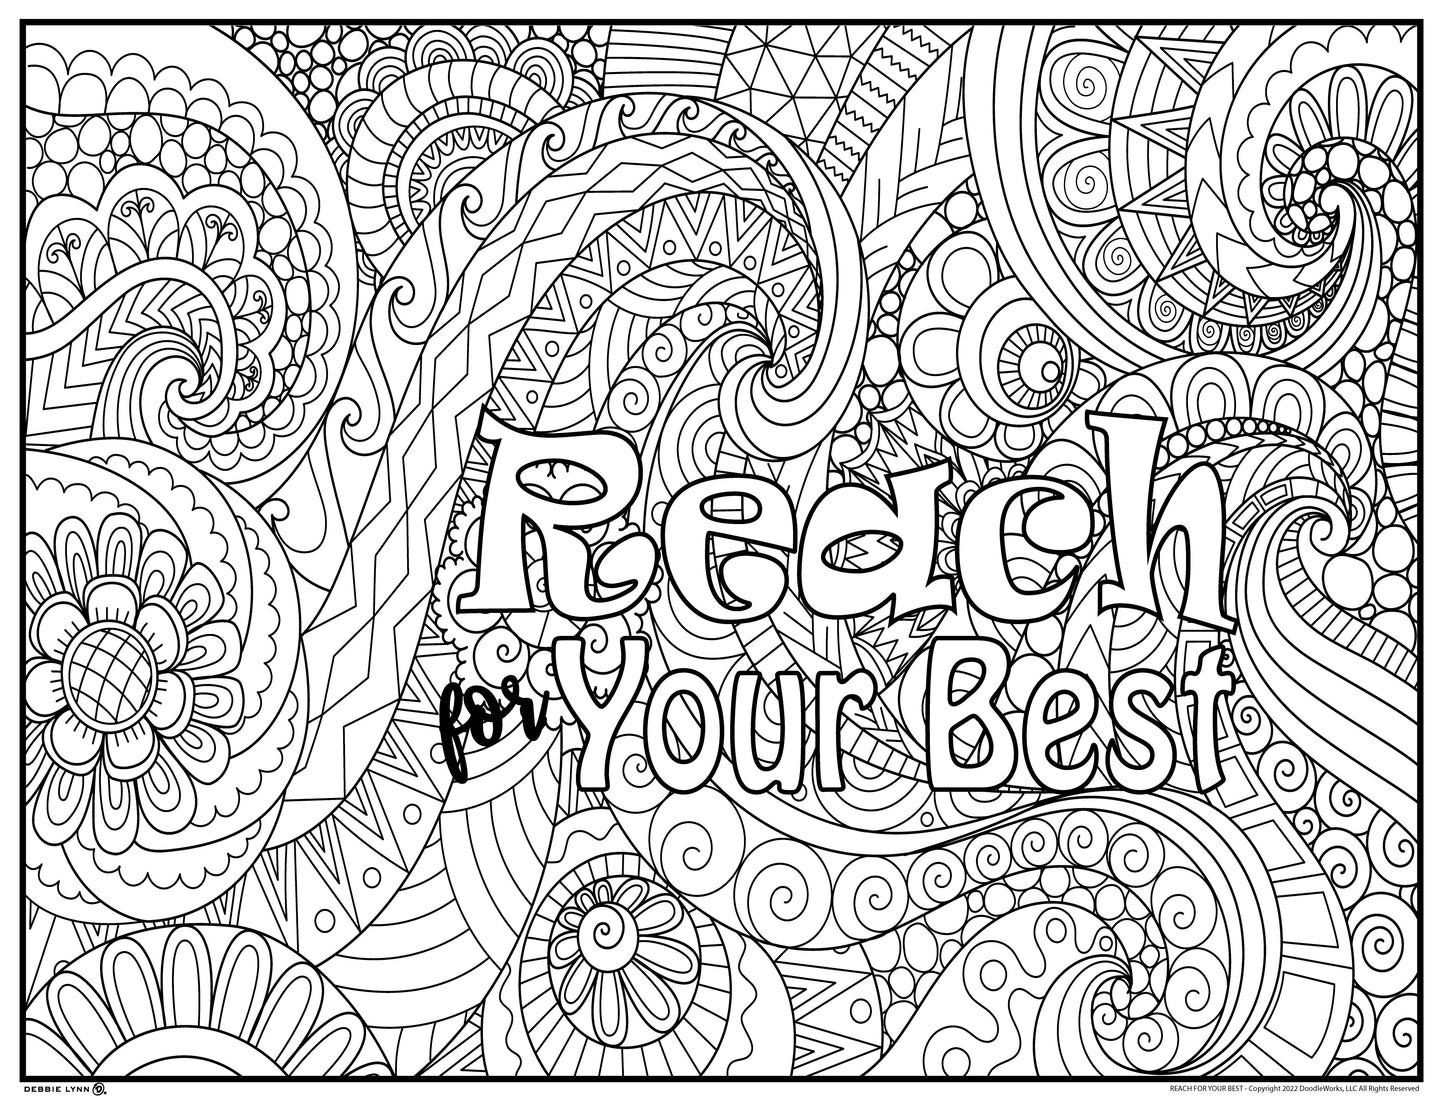 Debbie Lynn Rolled Coloring Posters 36x48 inches  | Choose from 30 Designs